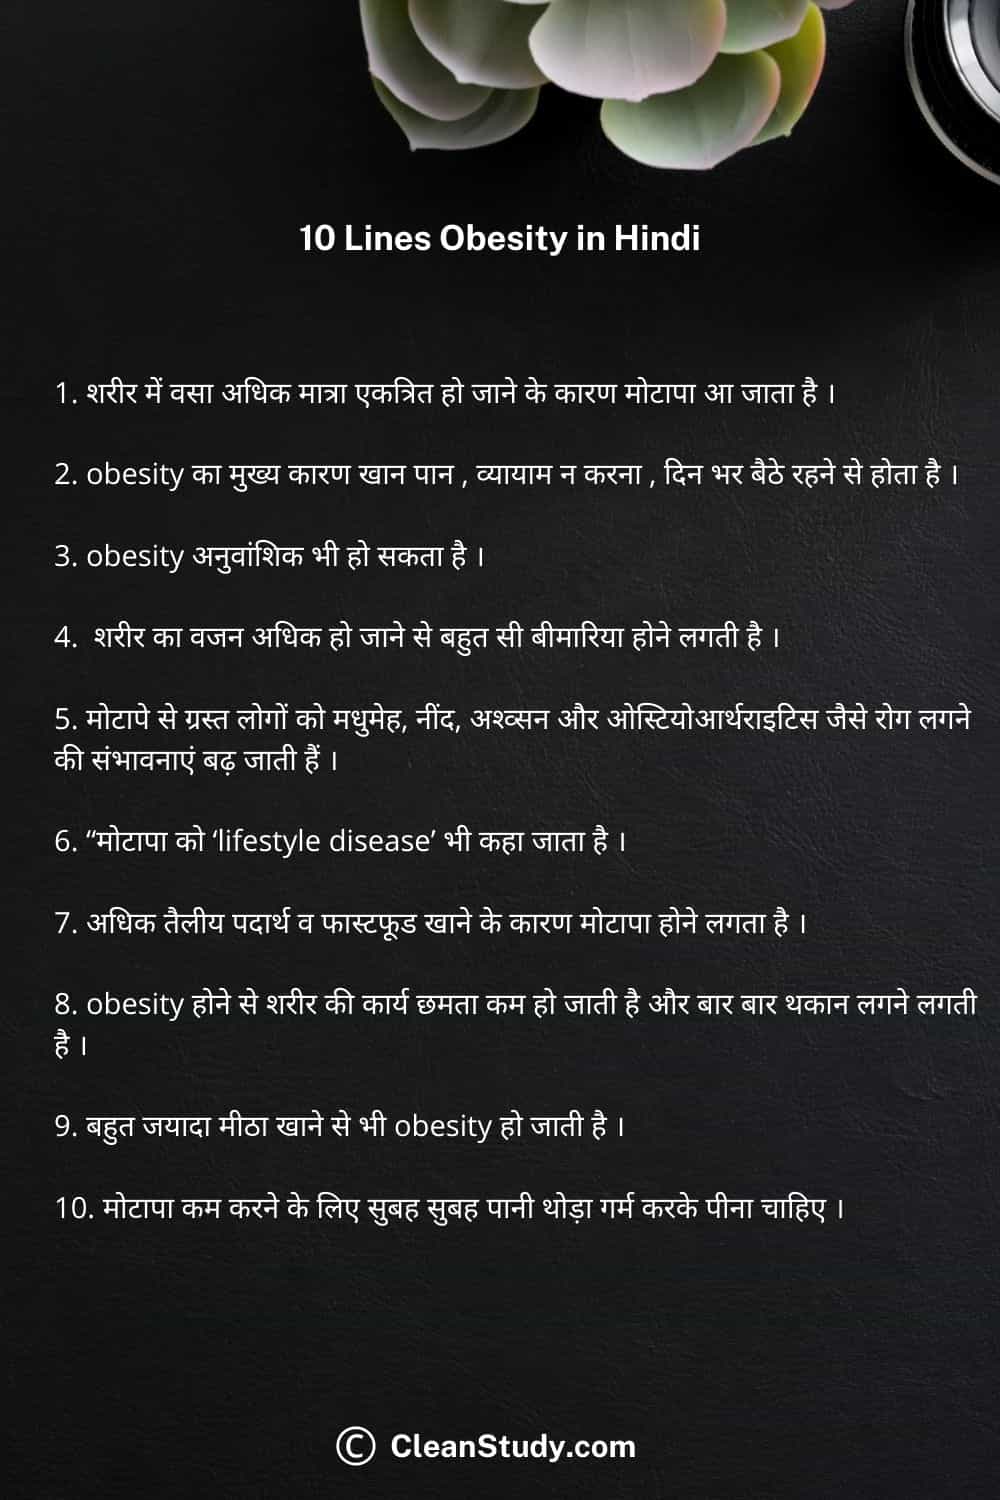 10 lines on obesity in hindi 